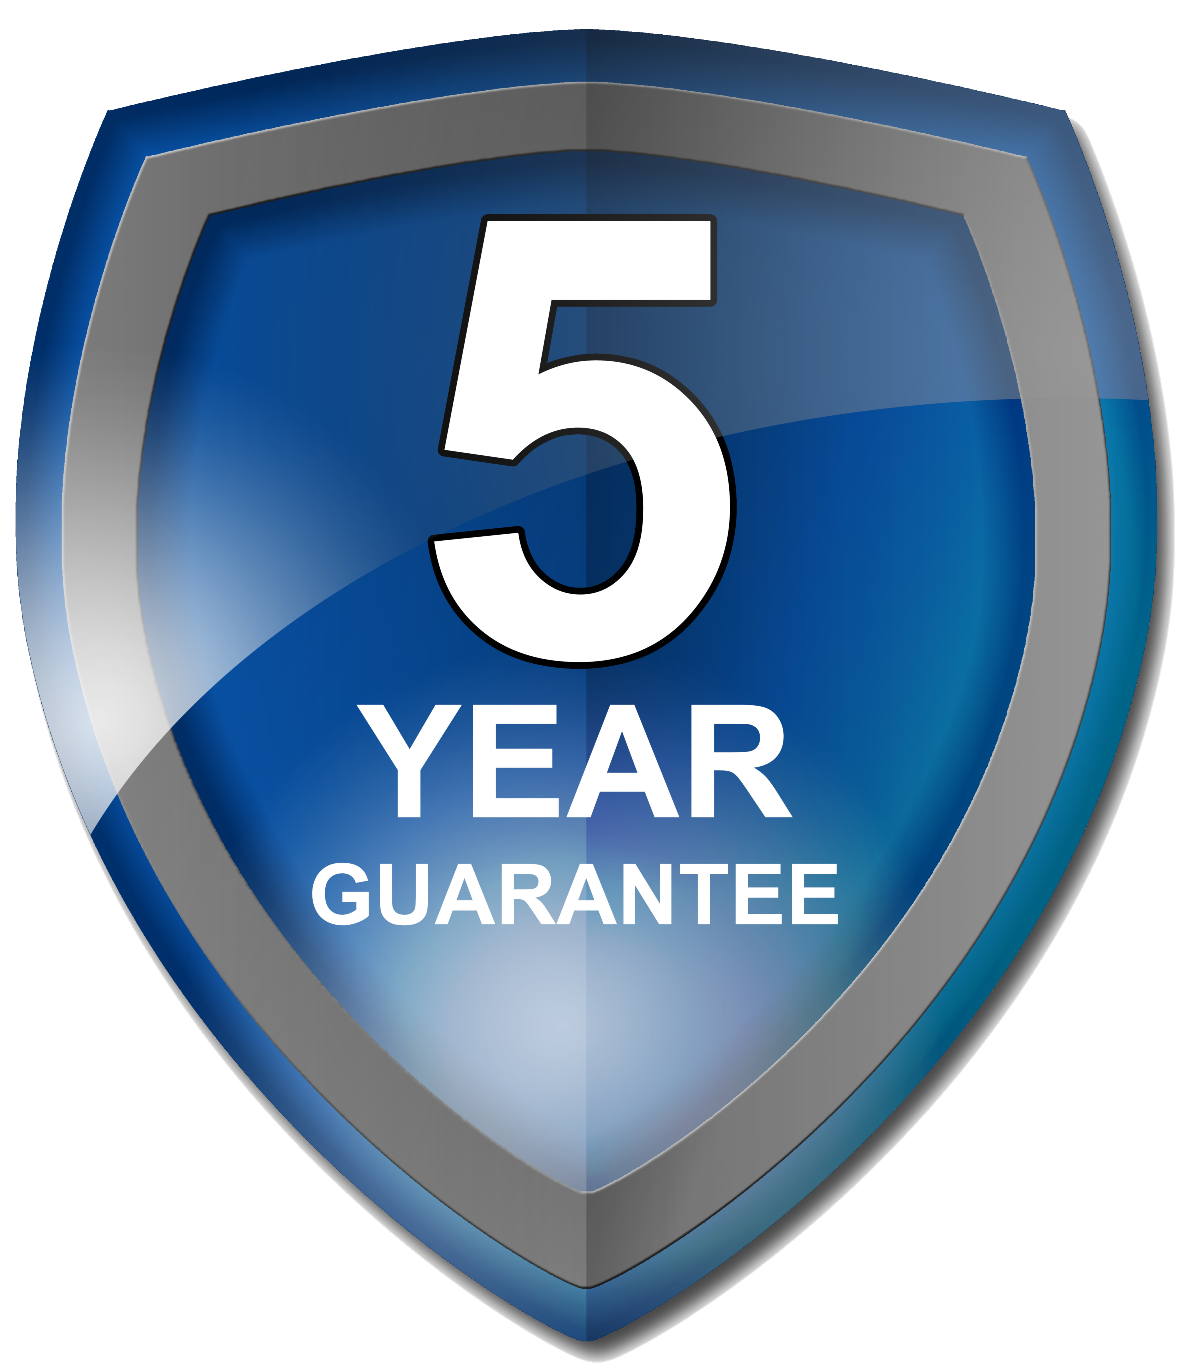 Our Mattresses Have a 5-Year Guarantee